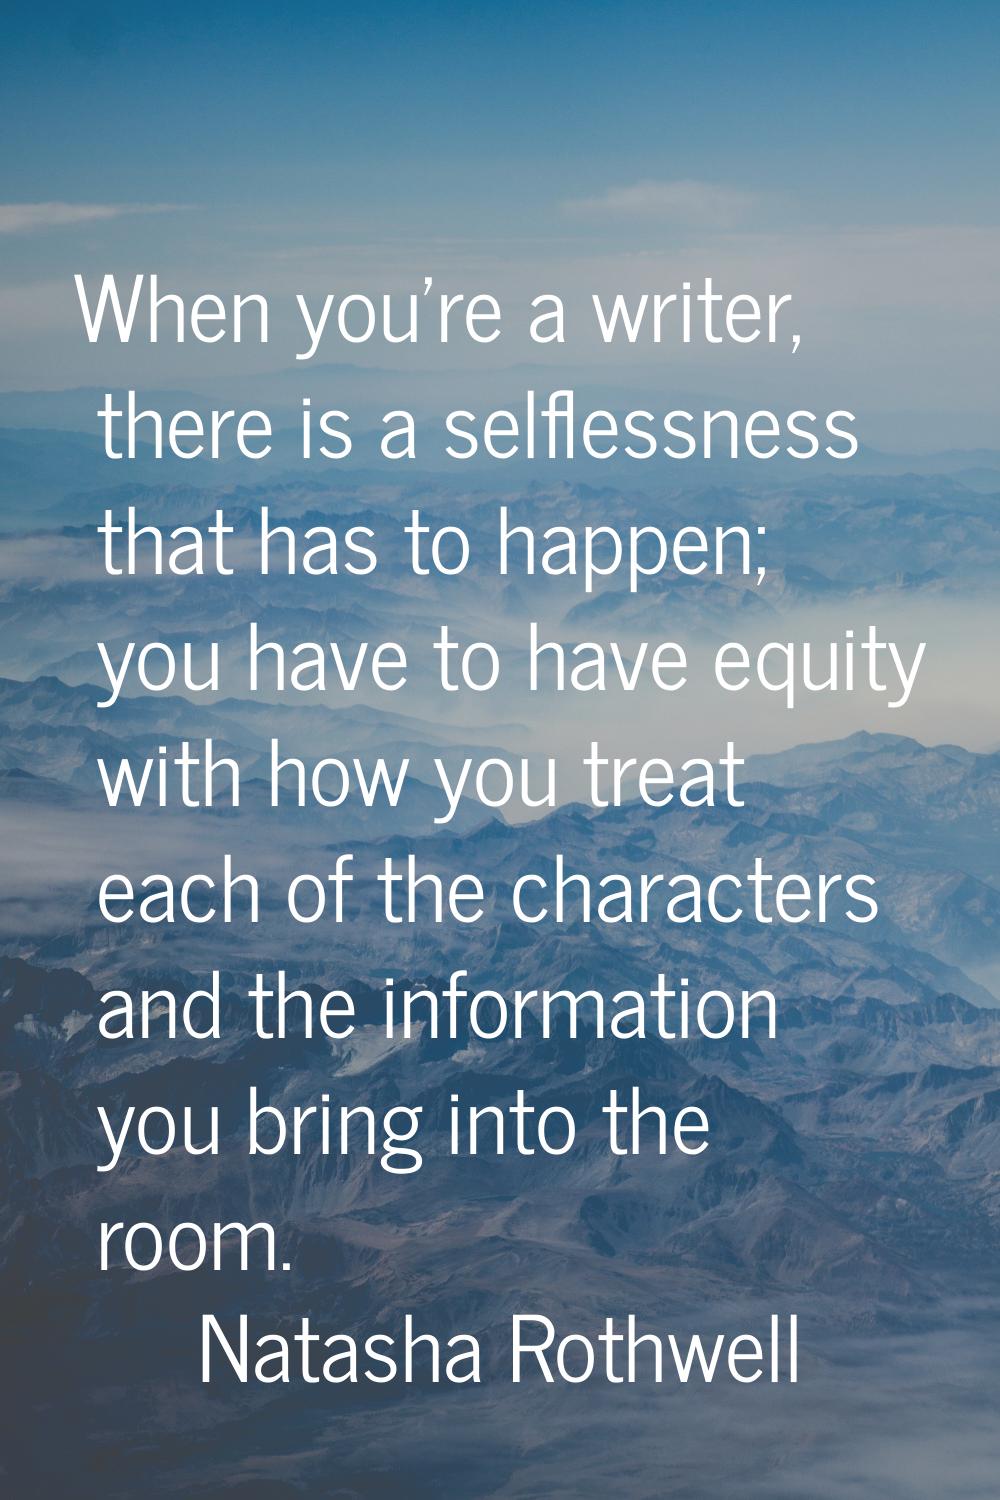 When you're a writer, there is a selflessness that has to happen; you have to have equity with how 